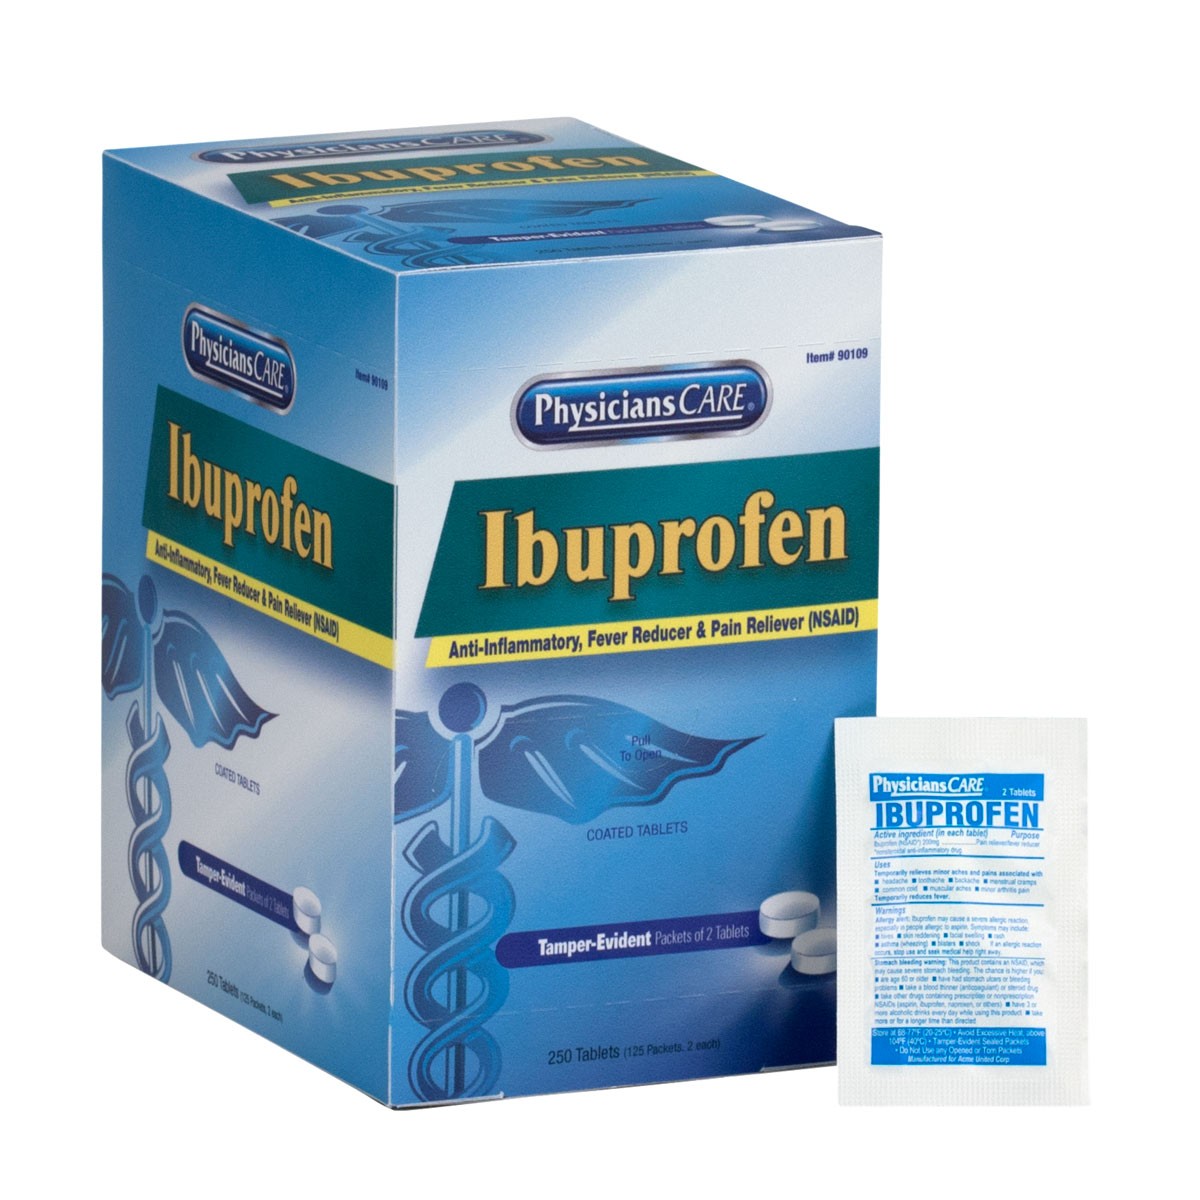 PhysiciansCare 200mg Ibuprofen, 125x2/Box - First Aid Safety